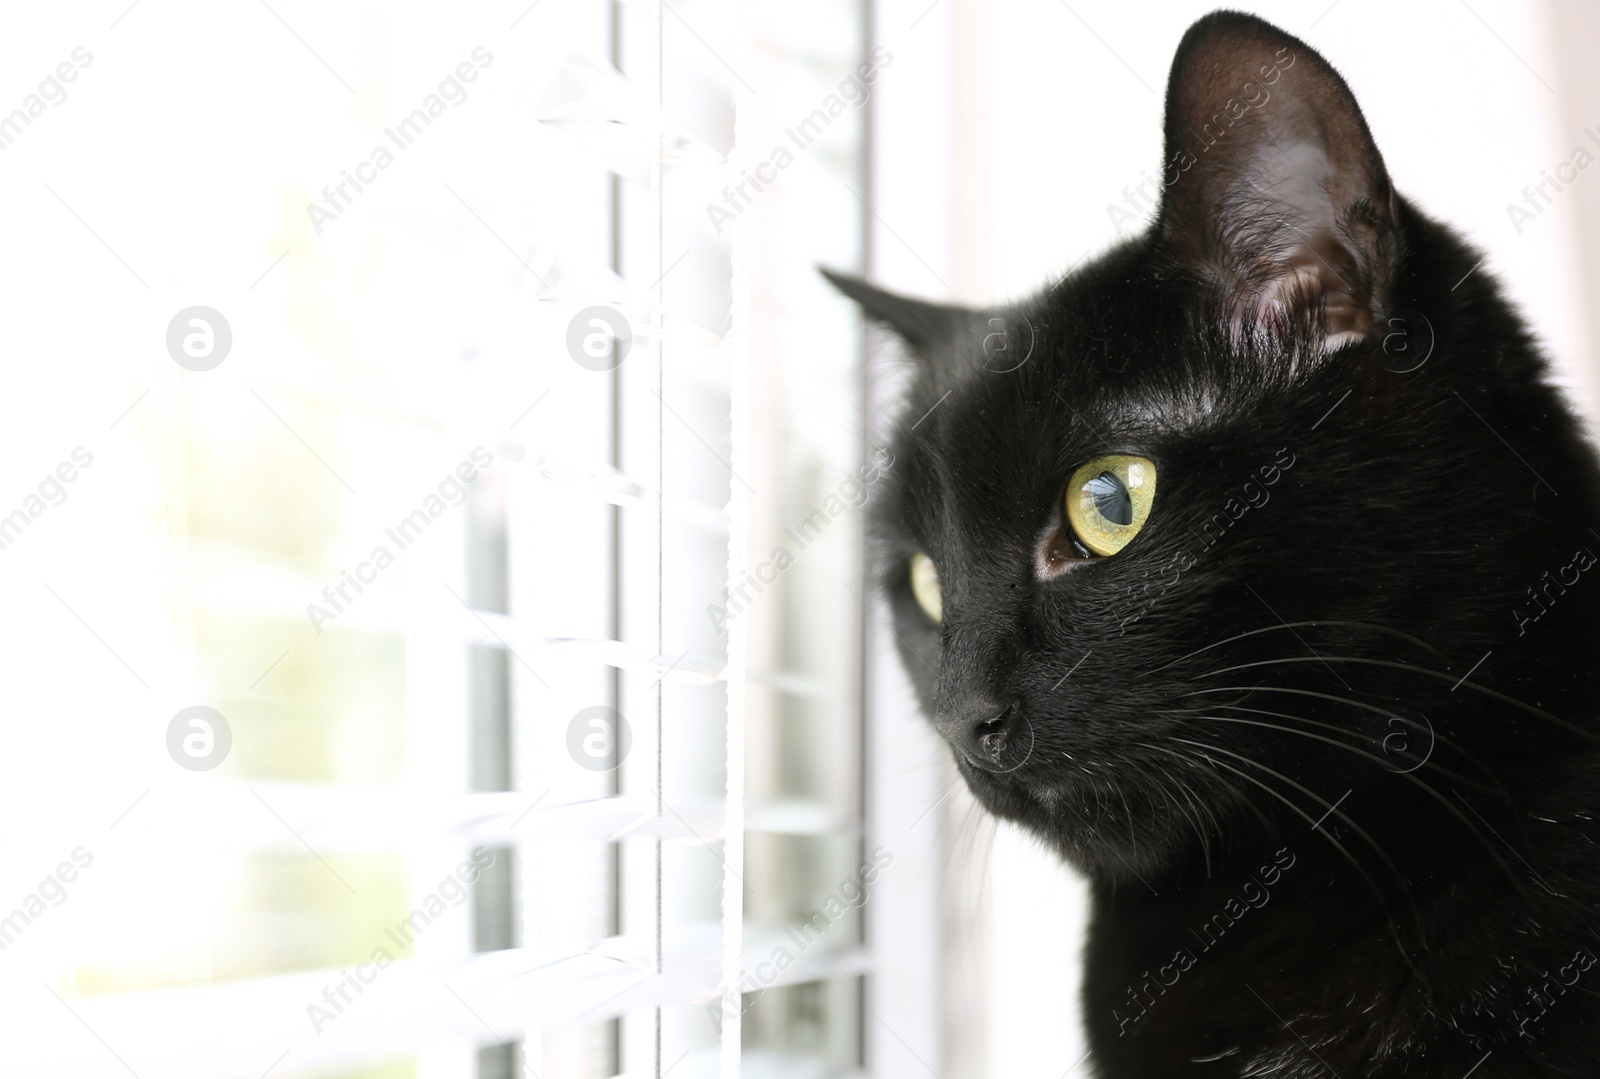 Photo of Adorable black cat near window with blinds indoors. Space for text